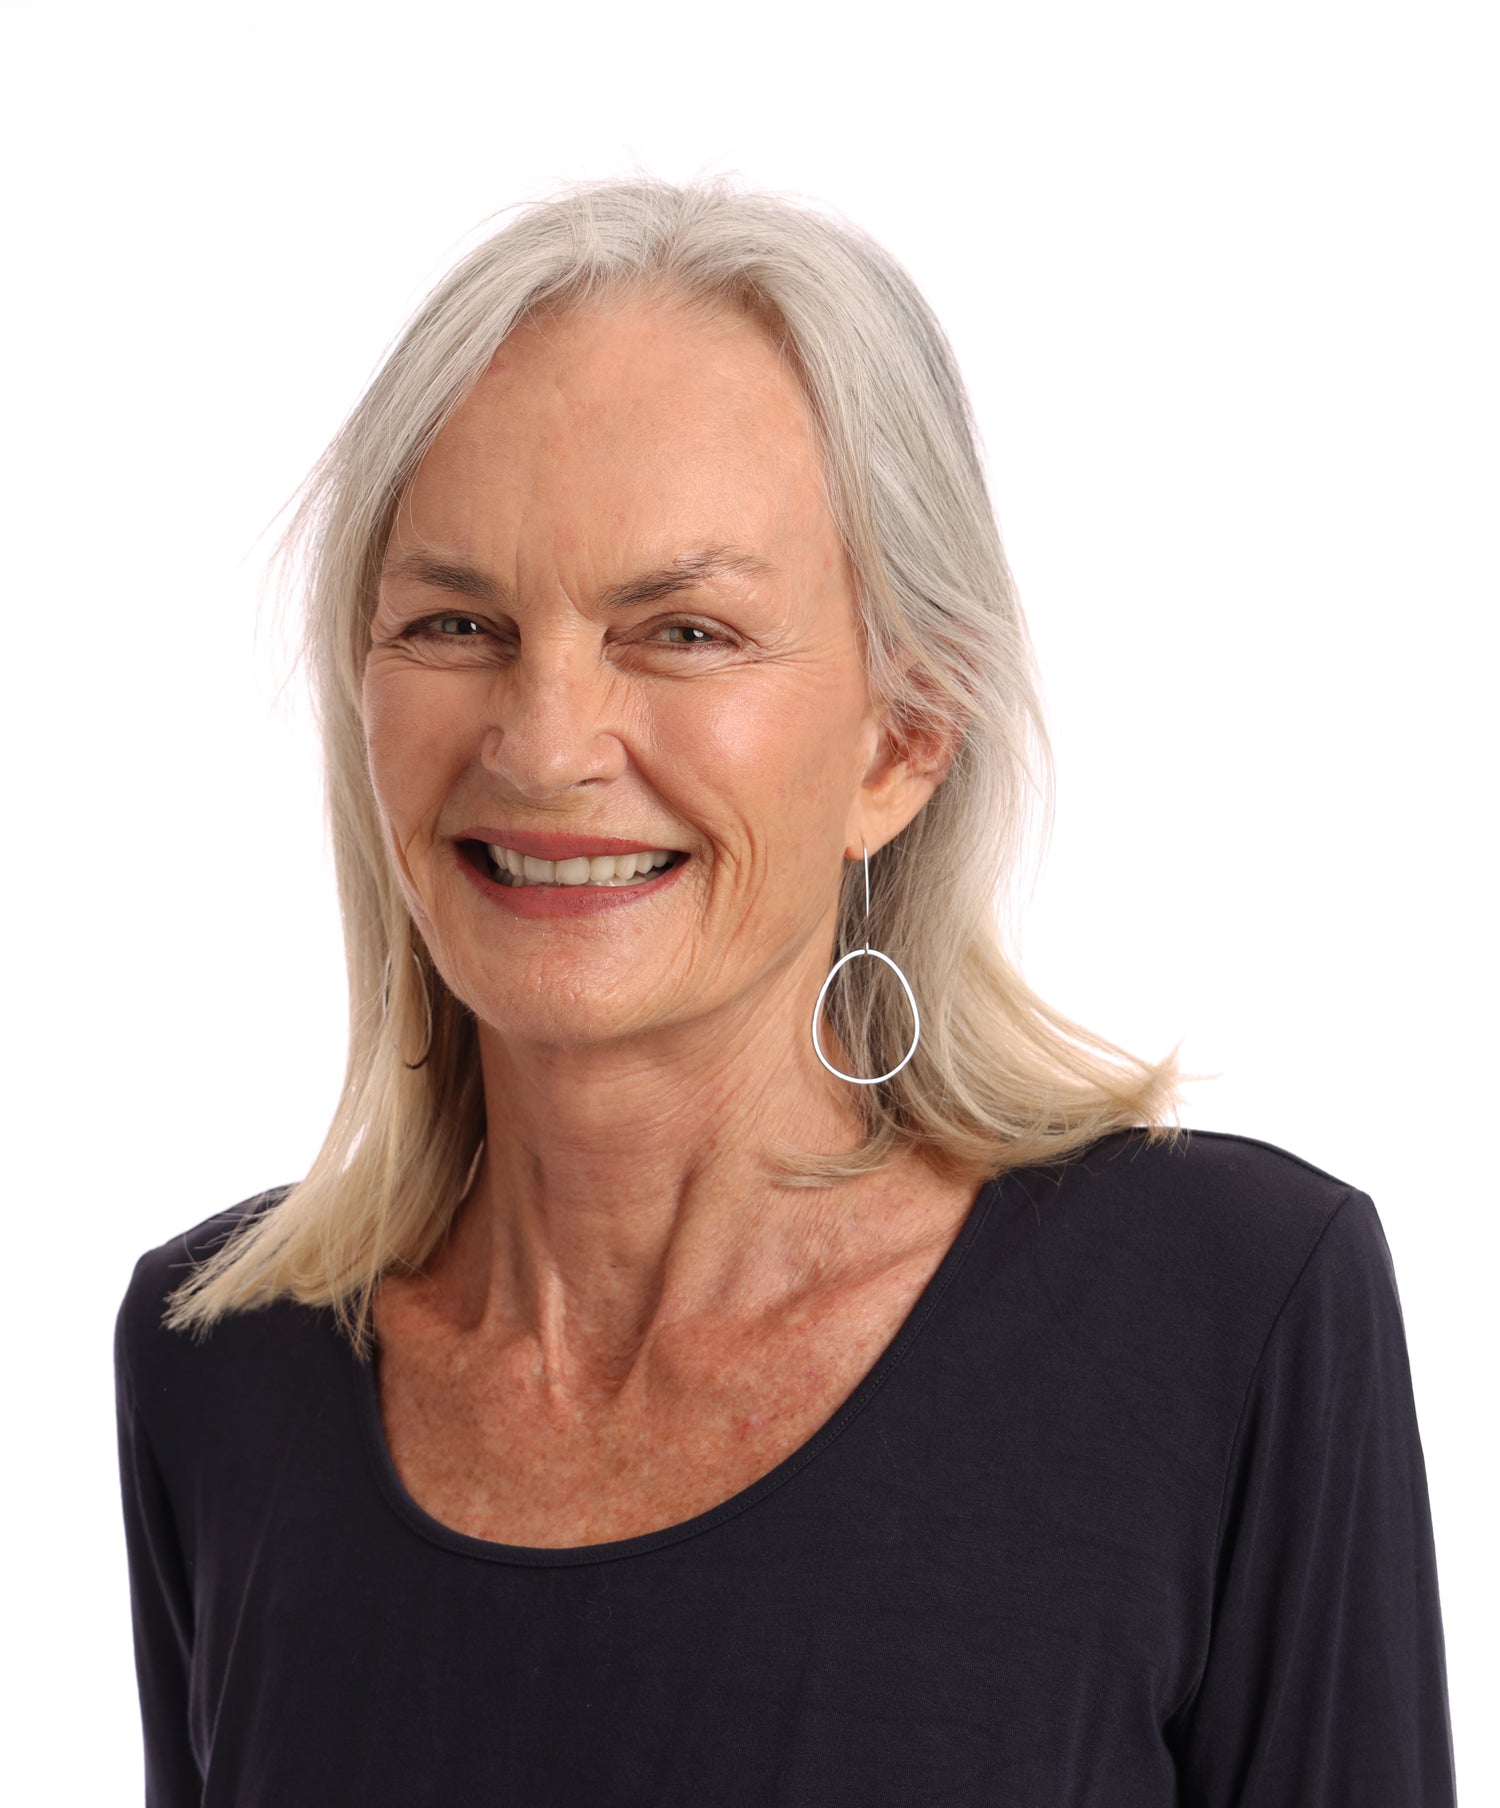 A headshot photo of a lady who is the founder of Wild Things Lifestyle. Her name is Jean Hattingh and she is wearing a black top with hooped silver earrings. She is smiling. The background is completely white.